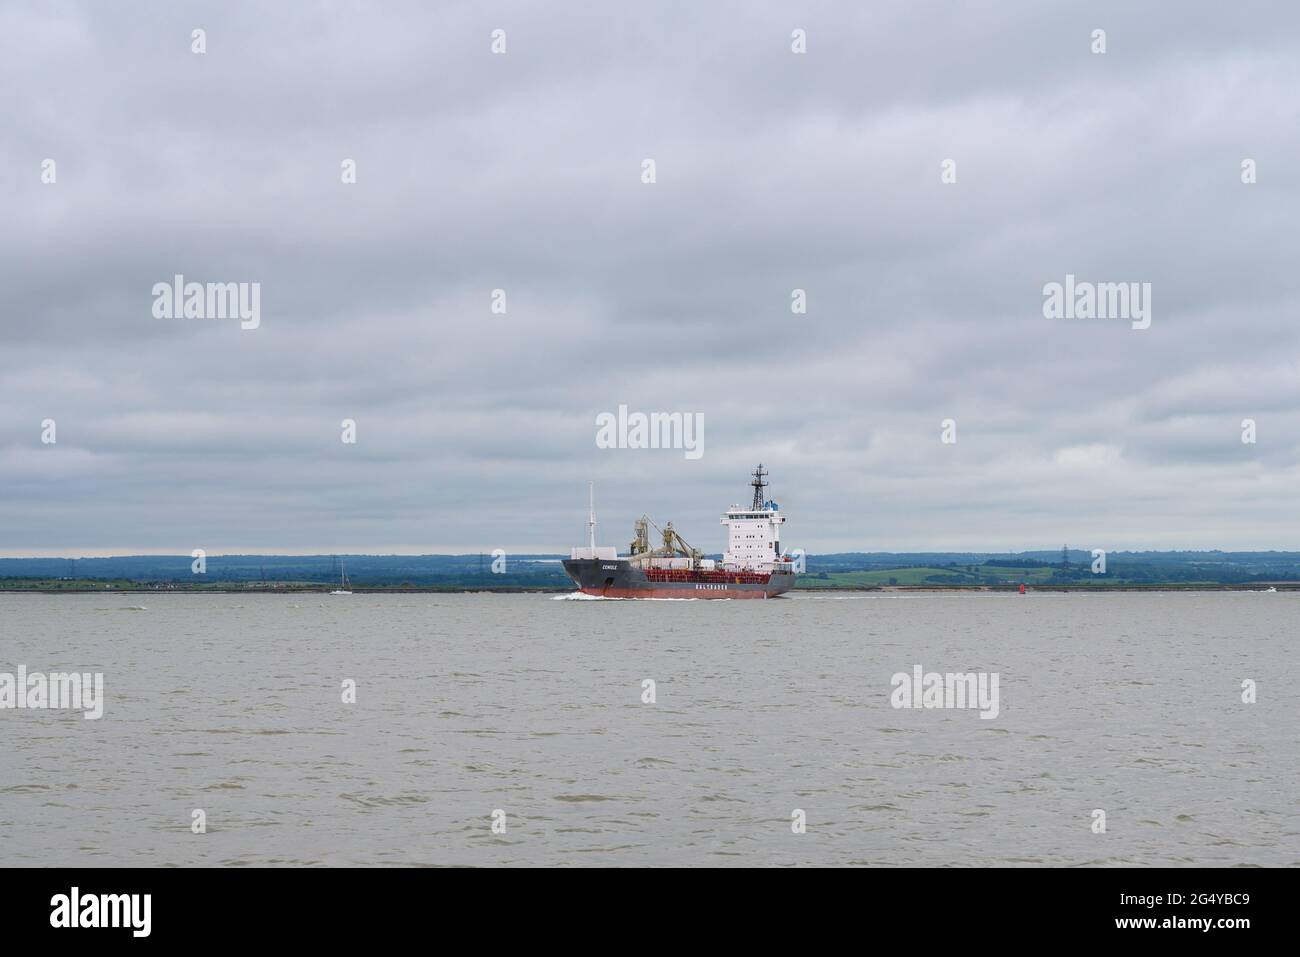 'Cemisle' cement carrier ship, operated by Baltrader, passing Isle of Sheppey on river Medway in the Thames estuary, Kent, England. Stock Photo